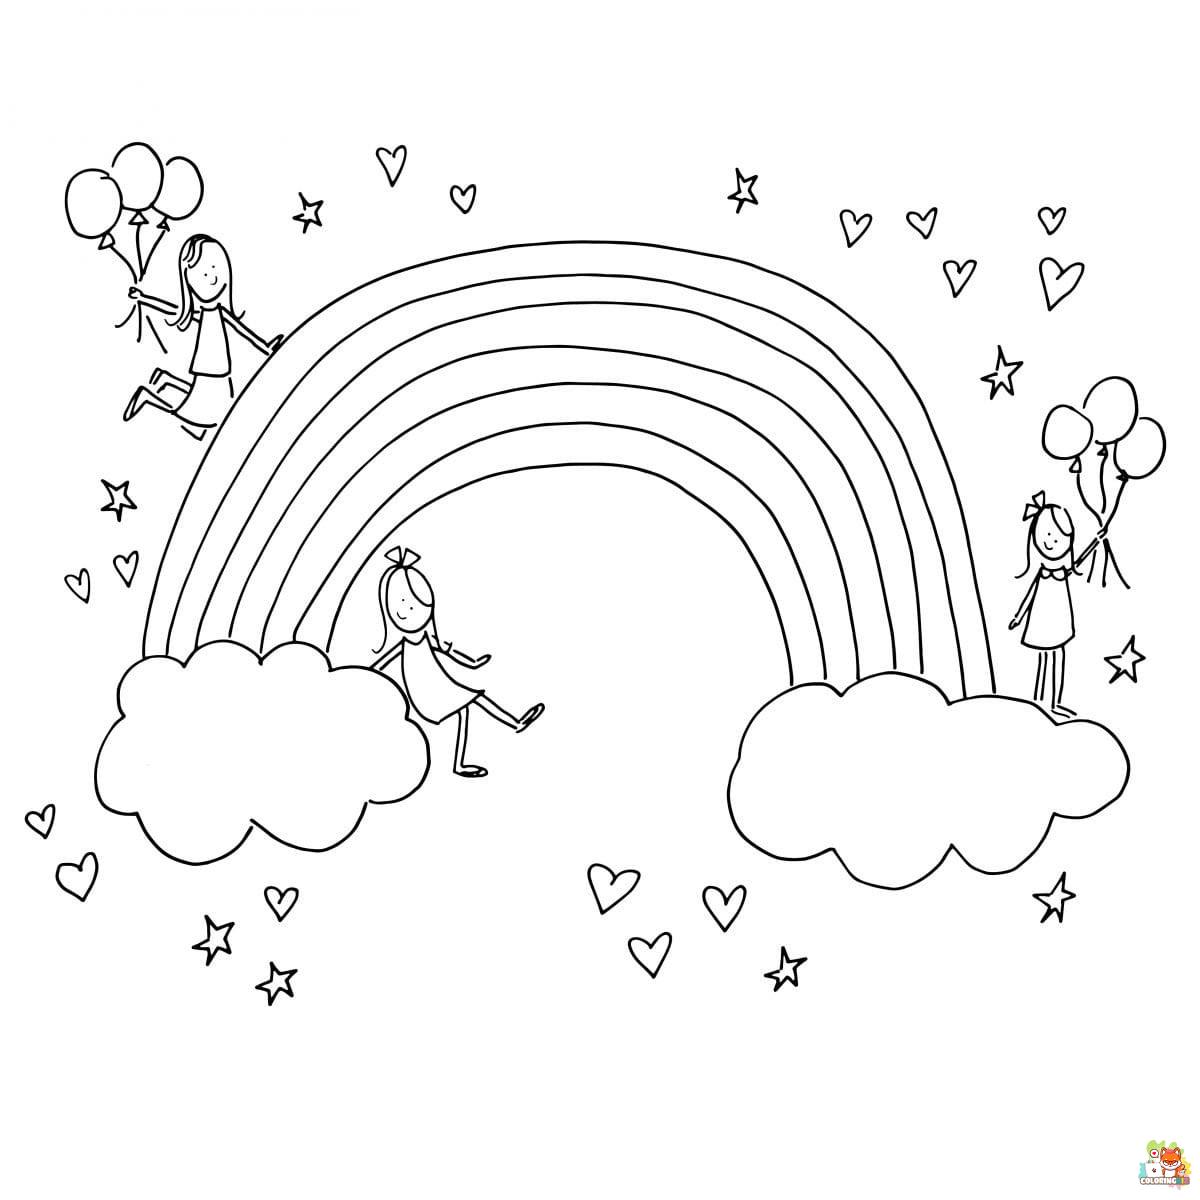 Rainbow Coloring Pages 2